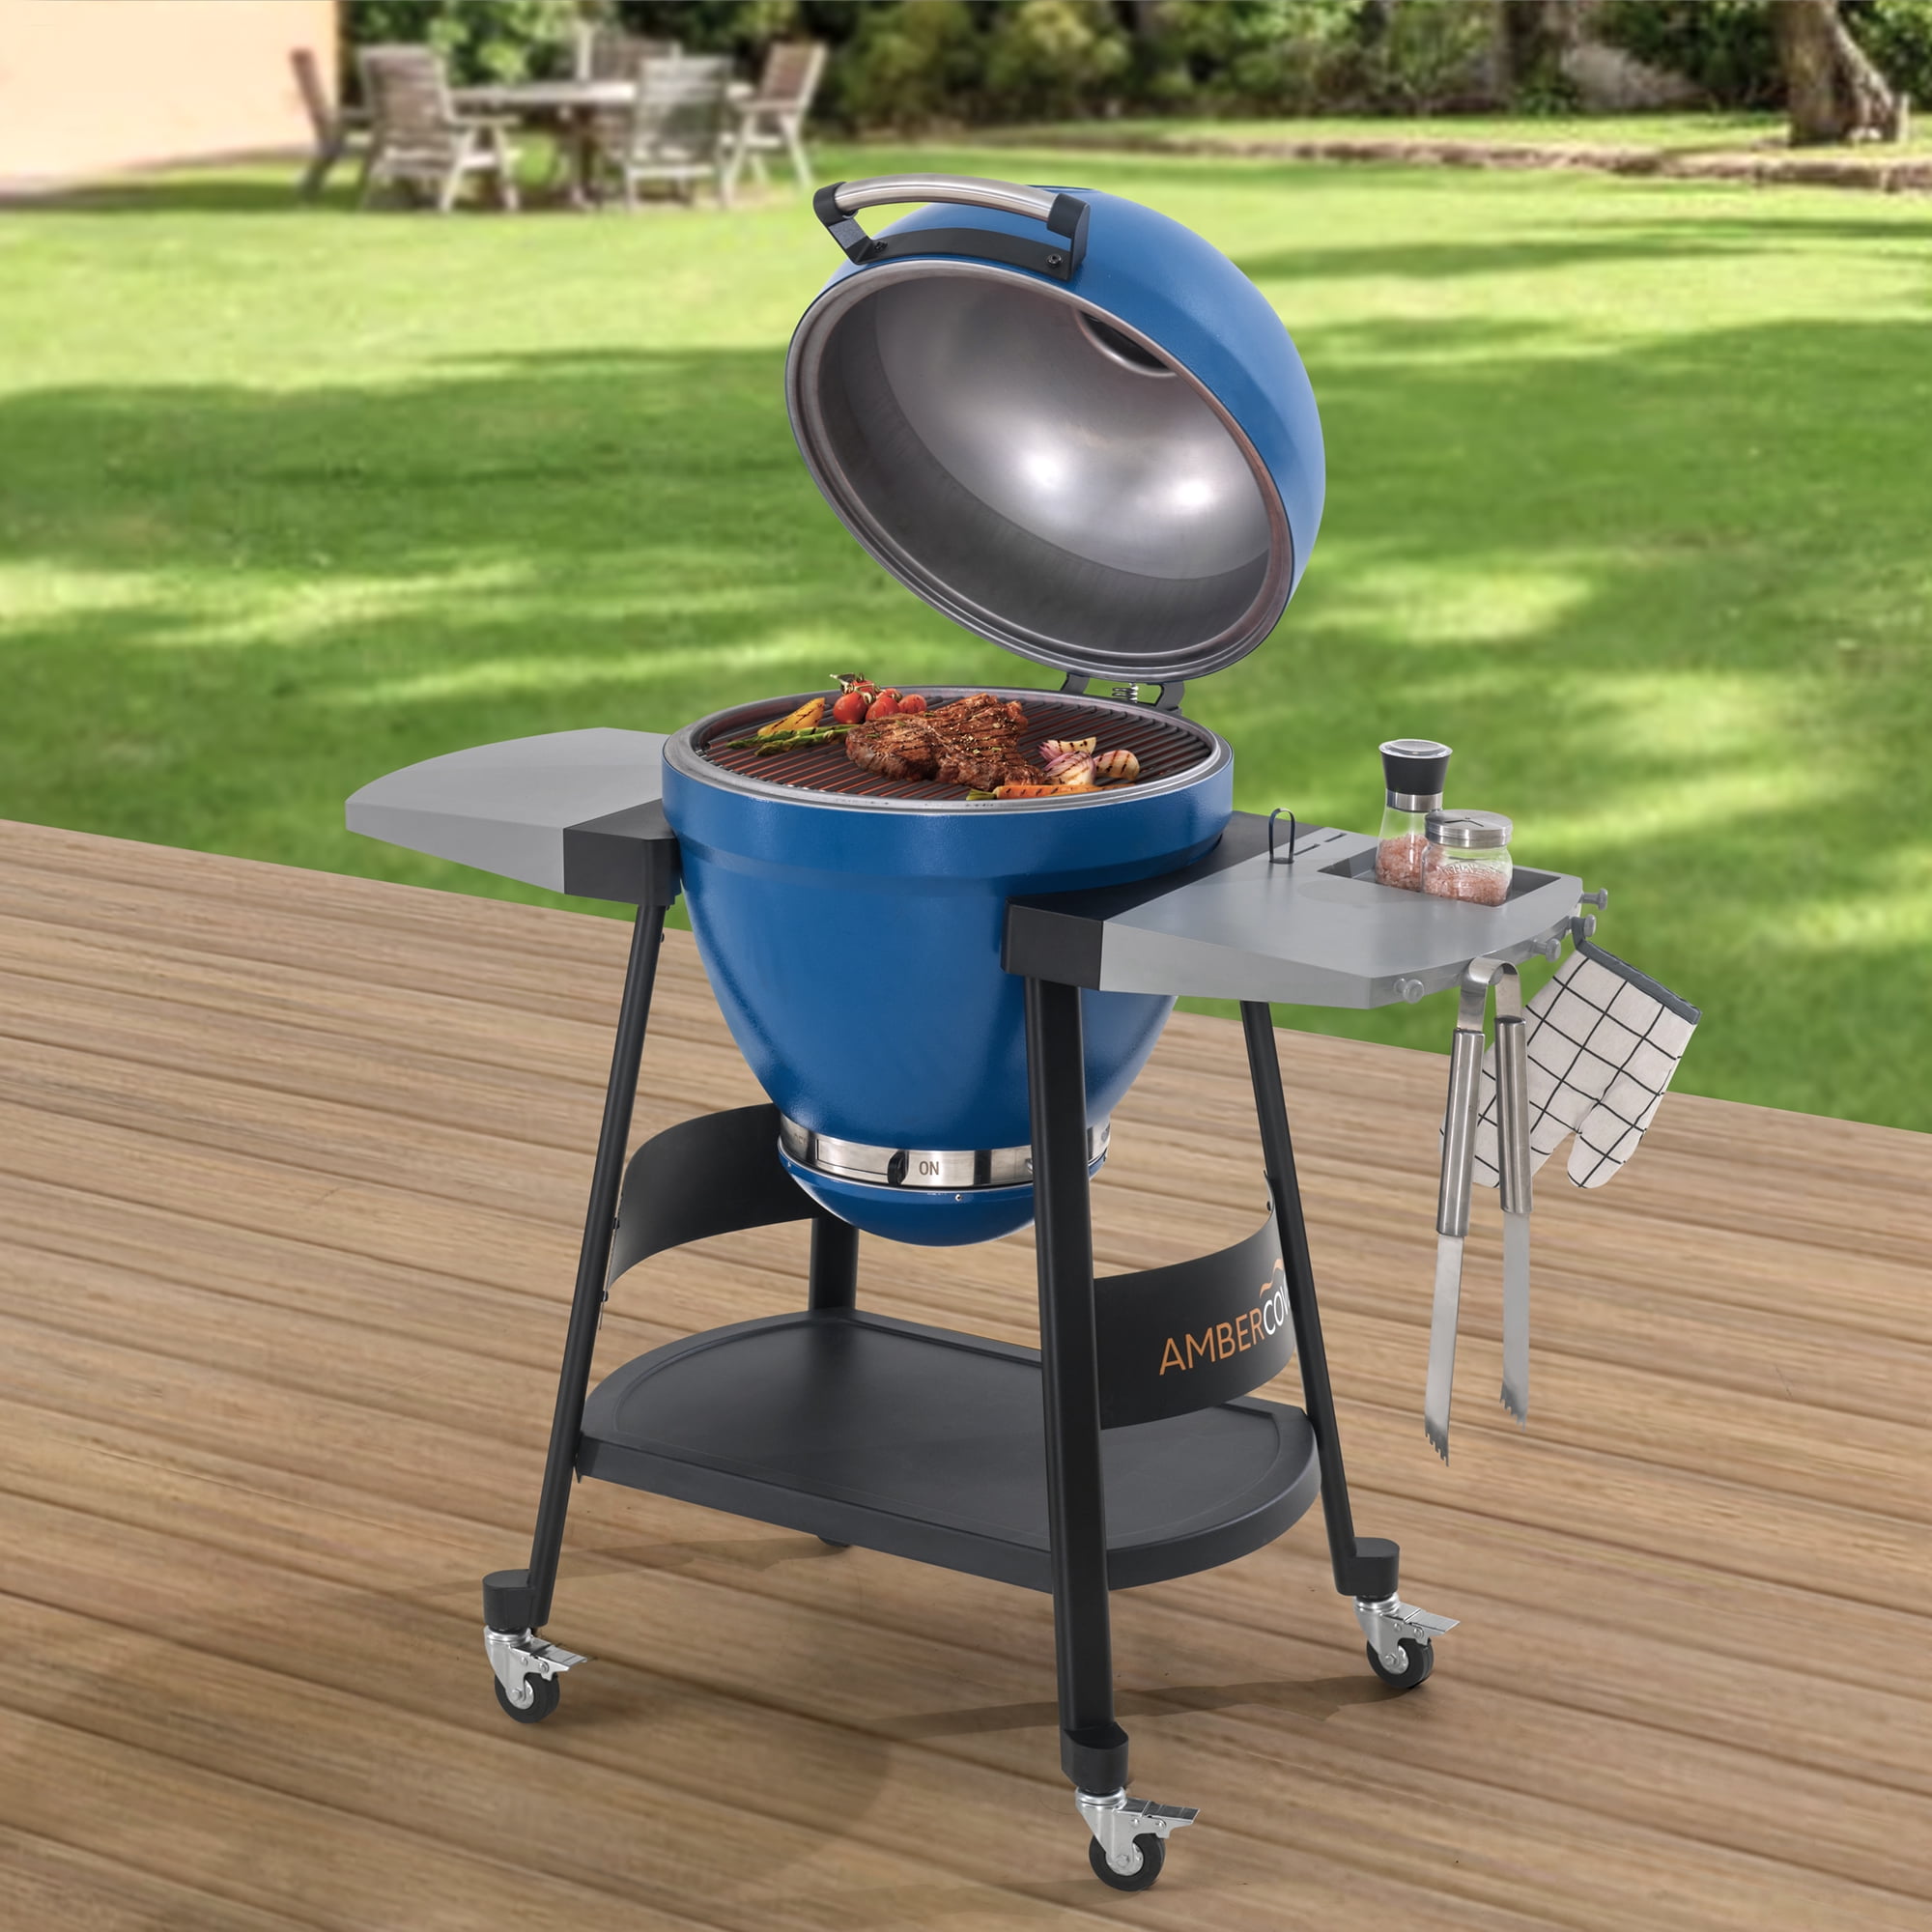 flygtninge 鍔 Joke AmberCove 20 Inch Outdoor BBQ Portable Kamado Charcoal Grill with Smoker,  Stainless Steel Removable Grate, and Four 2.5-Inch Lockable Universal  Wheels - Walmart.com